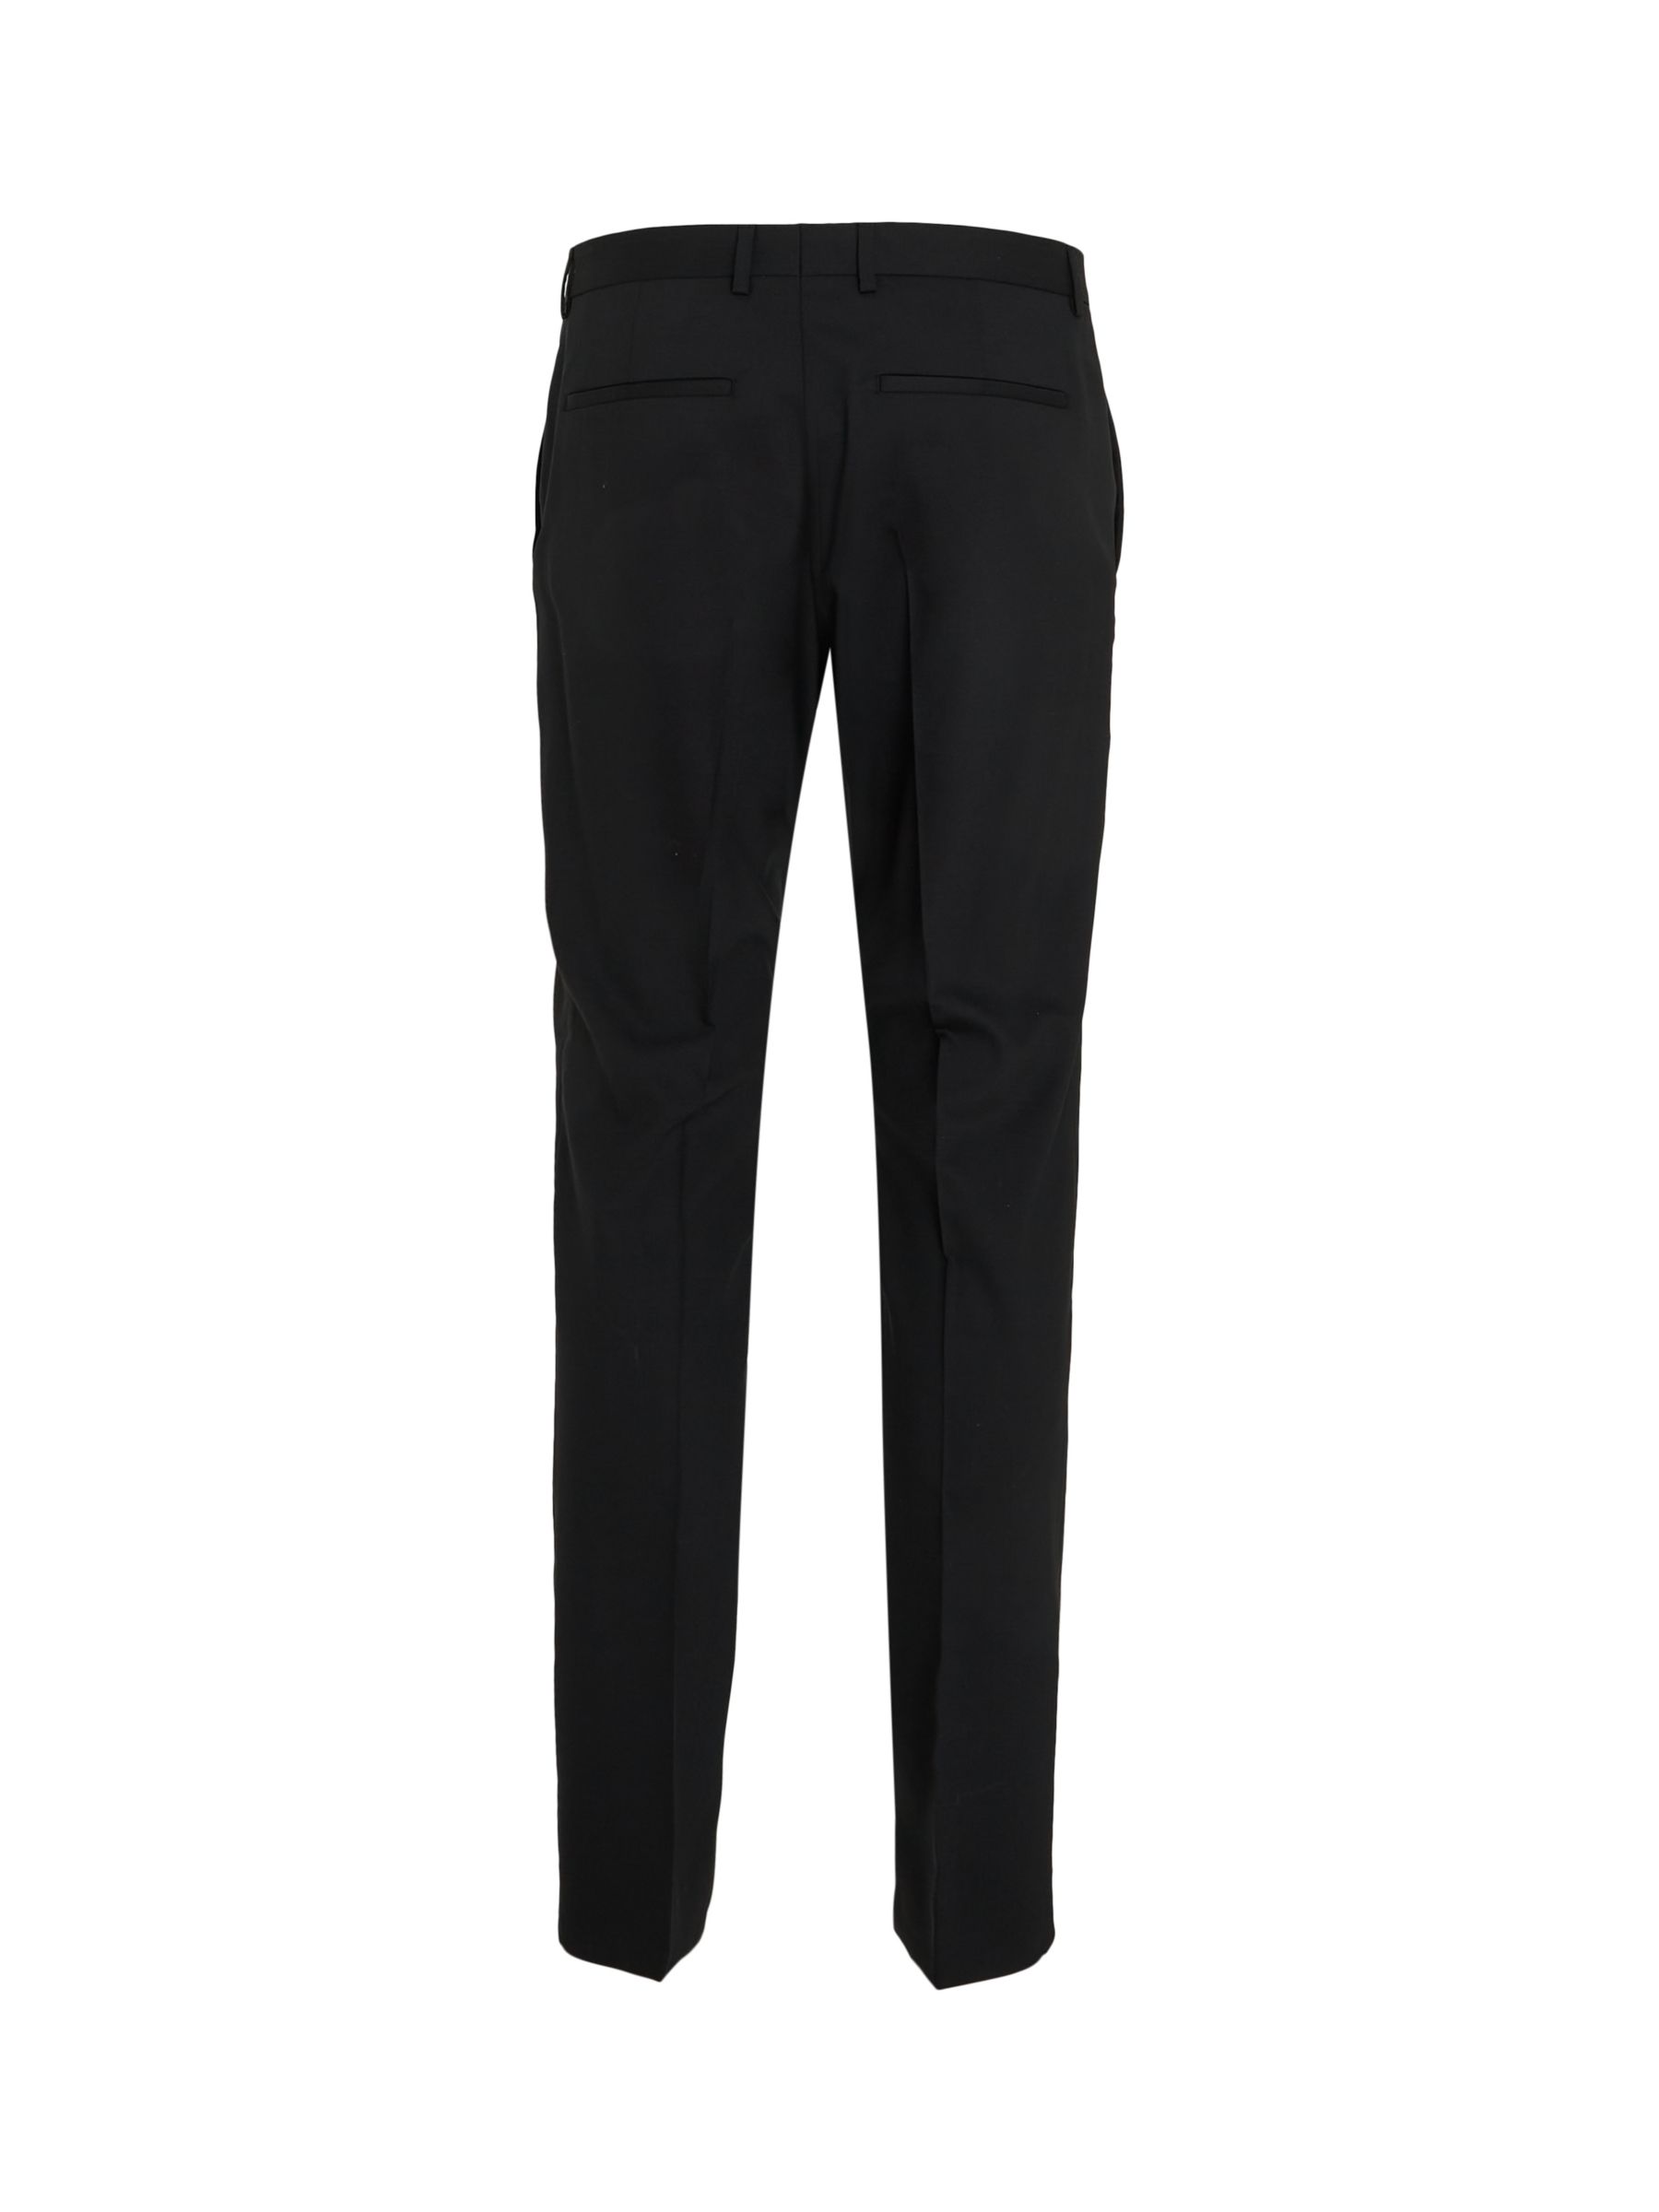 Calvin Klein Slim Wool Stretch Suit Trousers, Perfect Black, 34